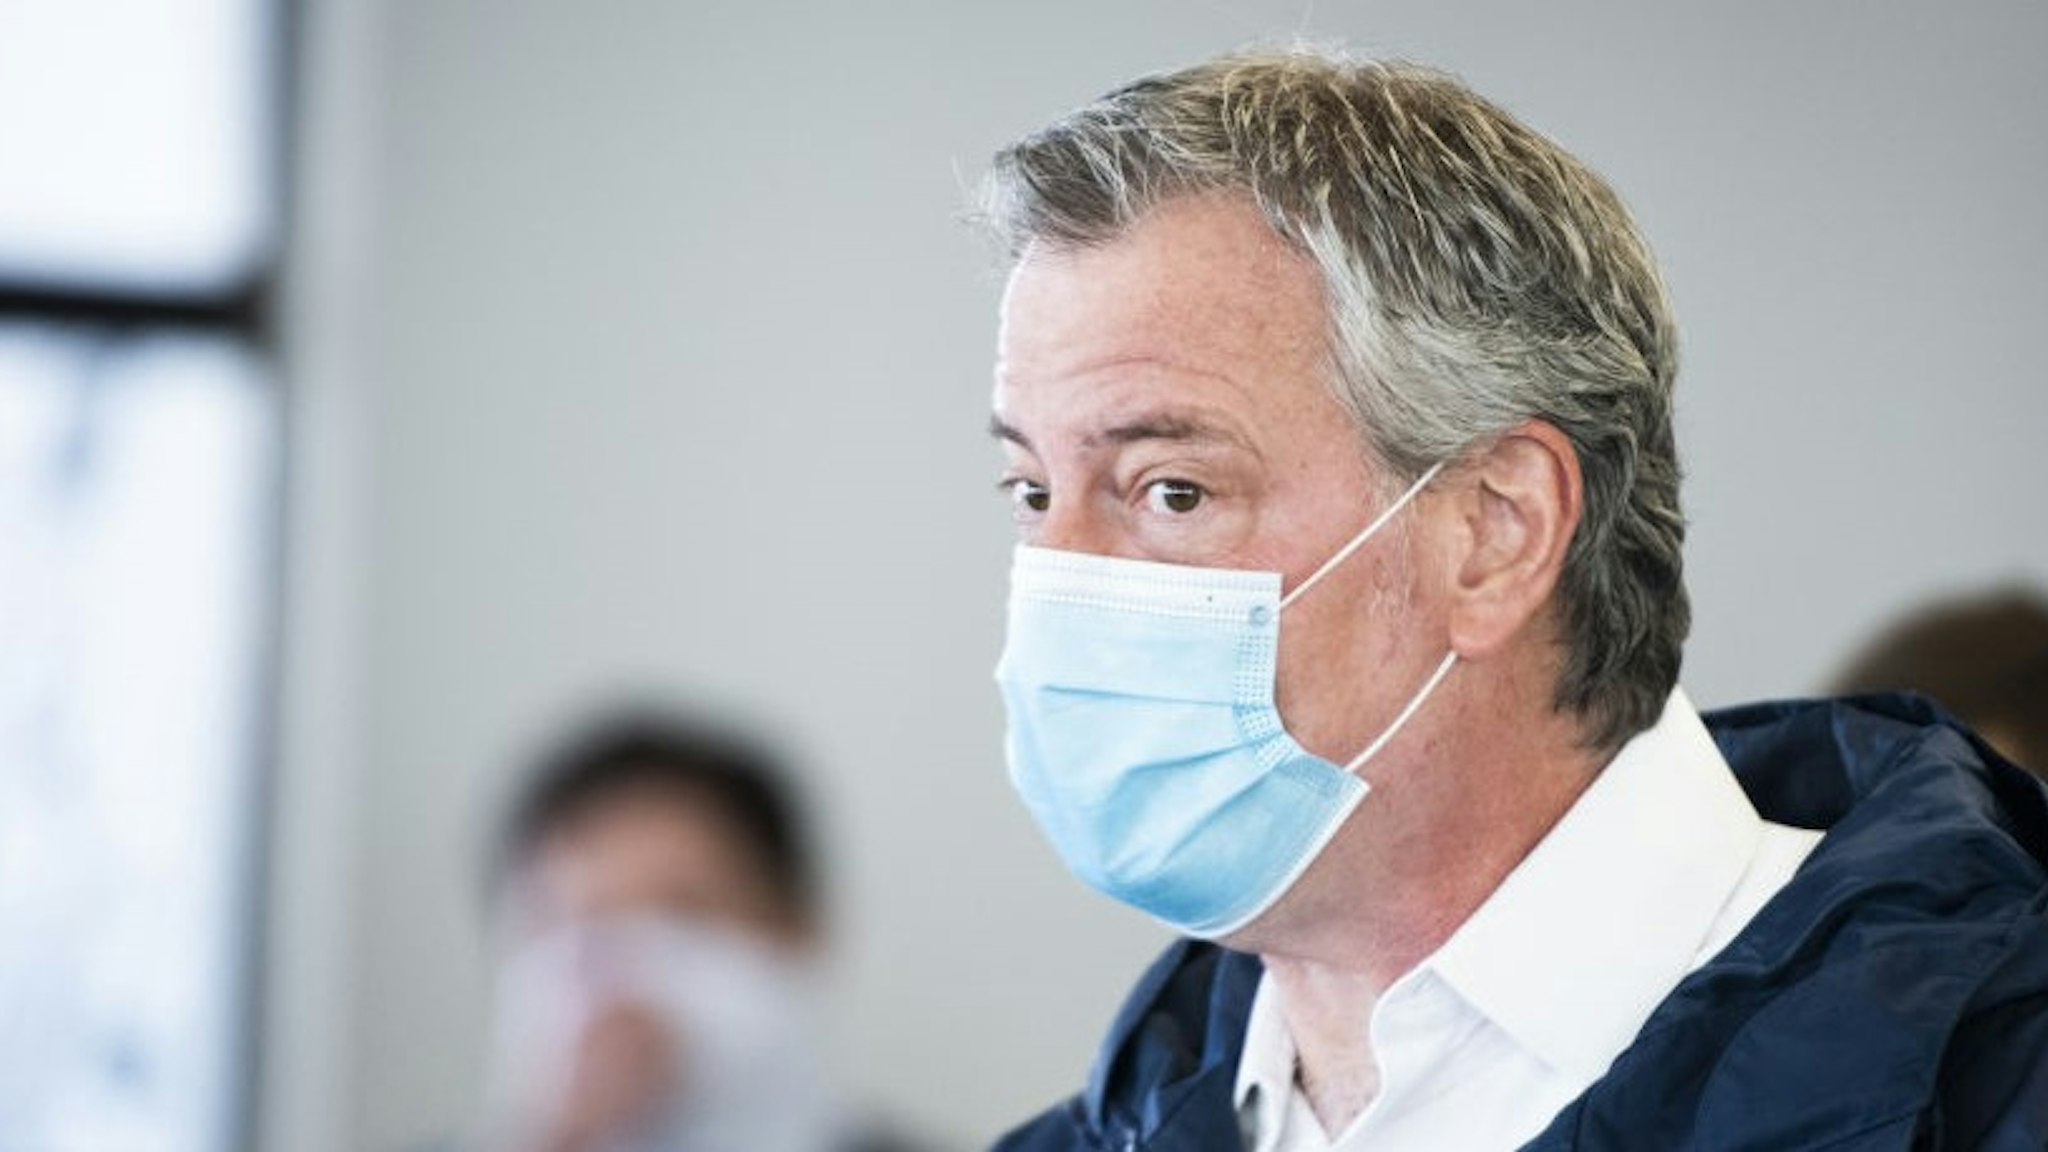 Bill de Blasio, mayor of New York, wears a protective mask while touring the Malia Mills swimwear factory, which has pivoted to manufacturing polypropylene gowns for medical workers, in the Brooklyn borough of New York, U.S., on Wednesday, April 22, 2020. New York City officials intend to enlist thousands of health-care workers next month to conduct hundreds of thousands of diagnostic tests a day, and isolating anyone found to be carrying the disease. Photographer: